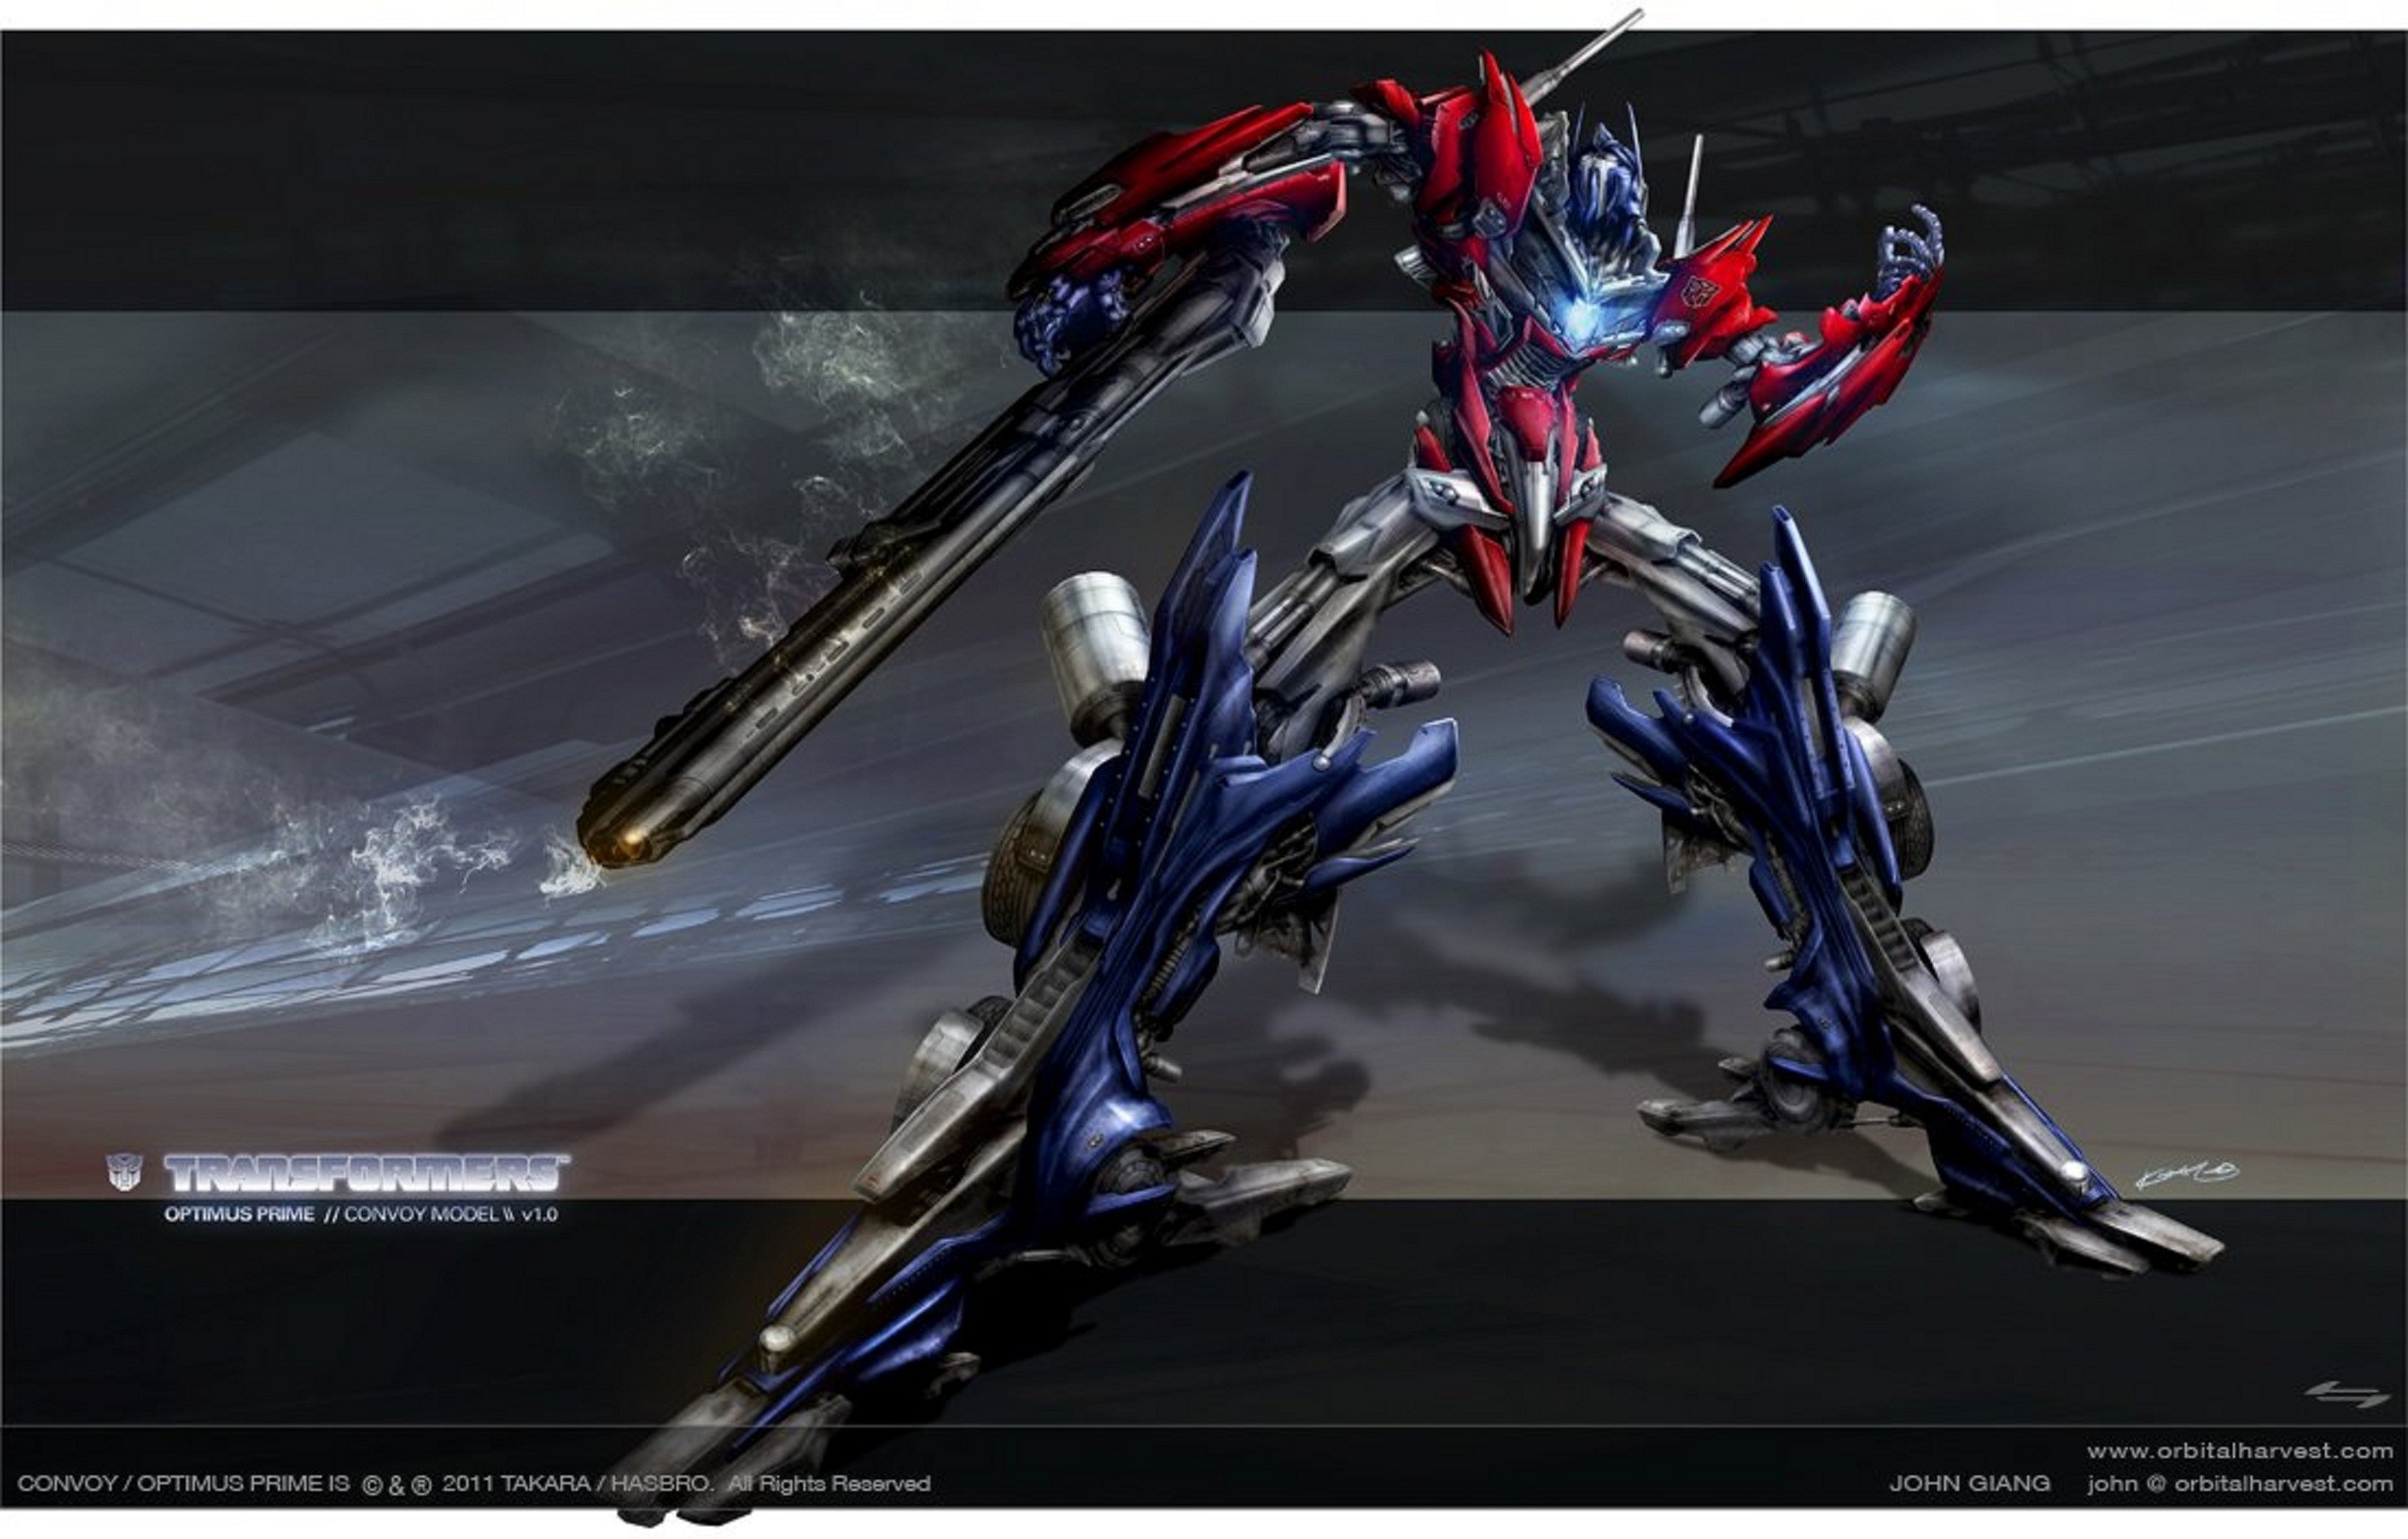 Transformers Prime Images Transformers - Transformers Prime Optimus Prime Wallpaper Hd - HD Wallpaper 